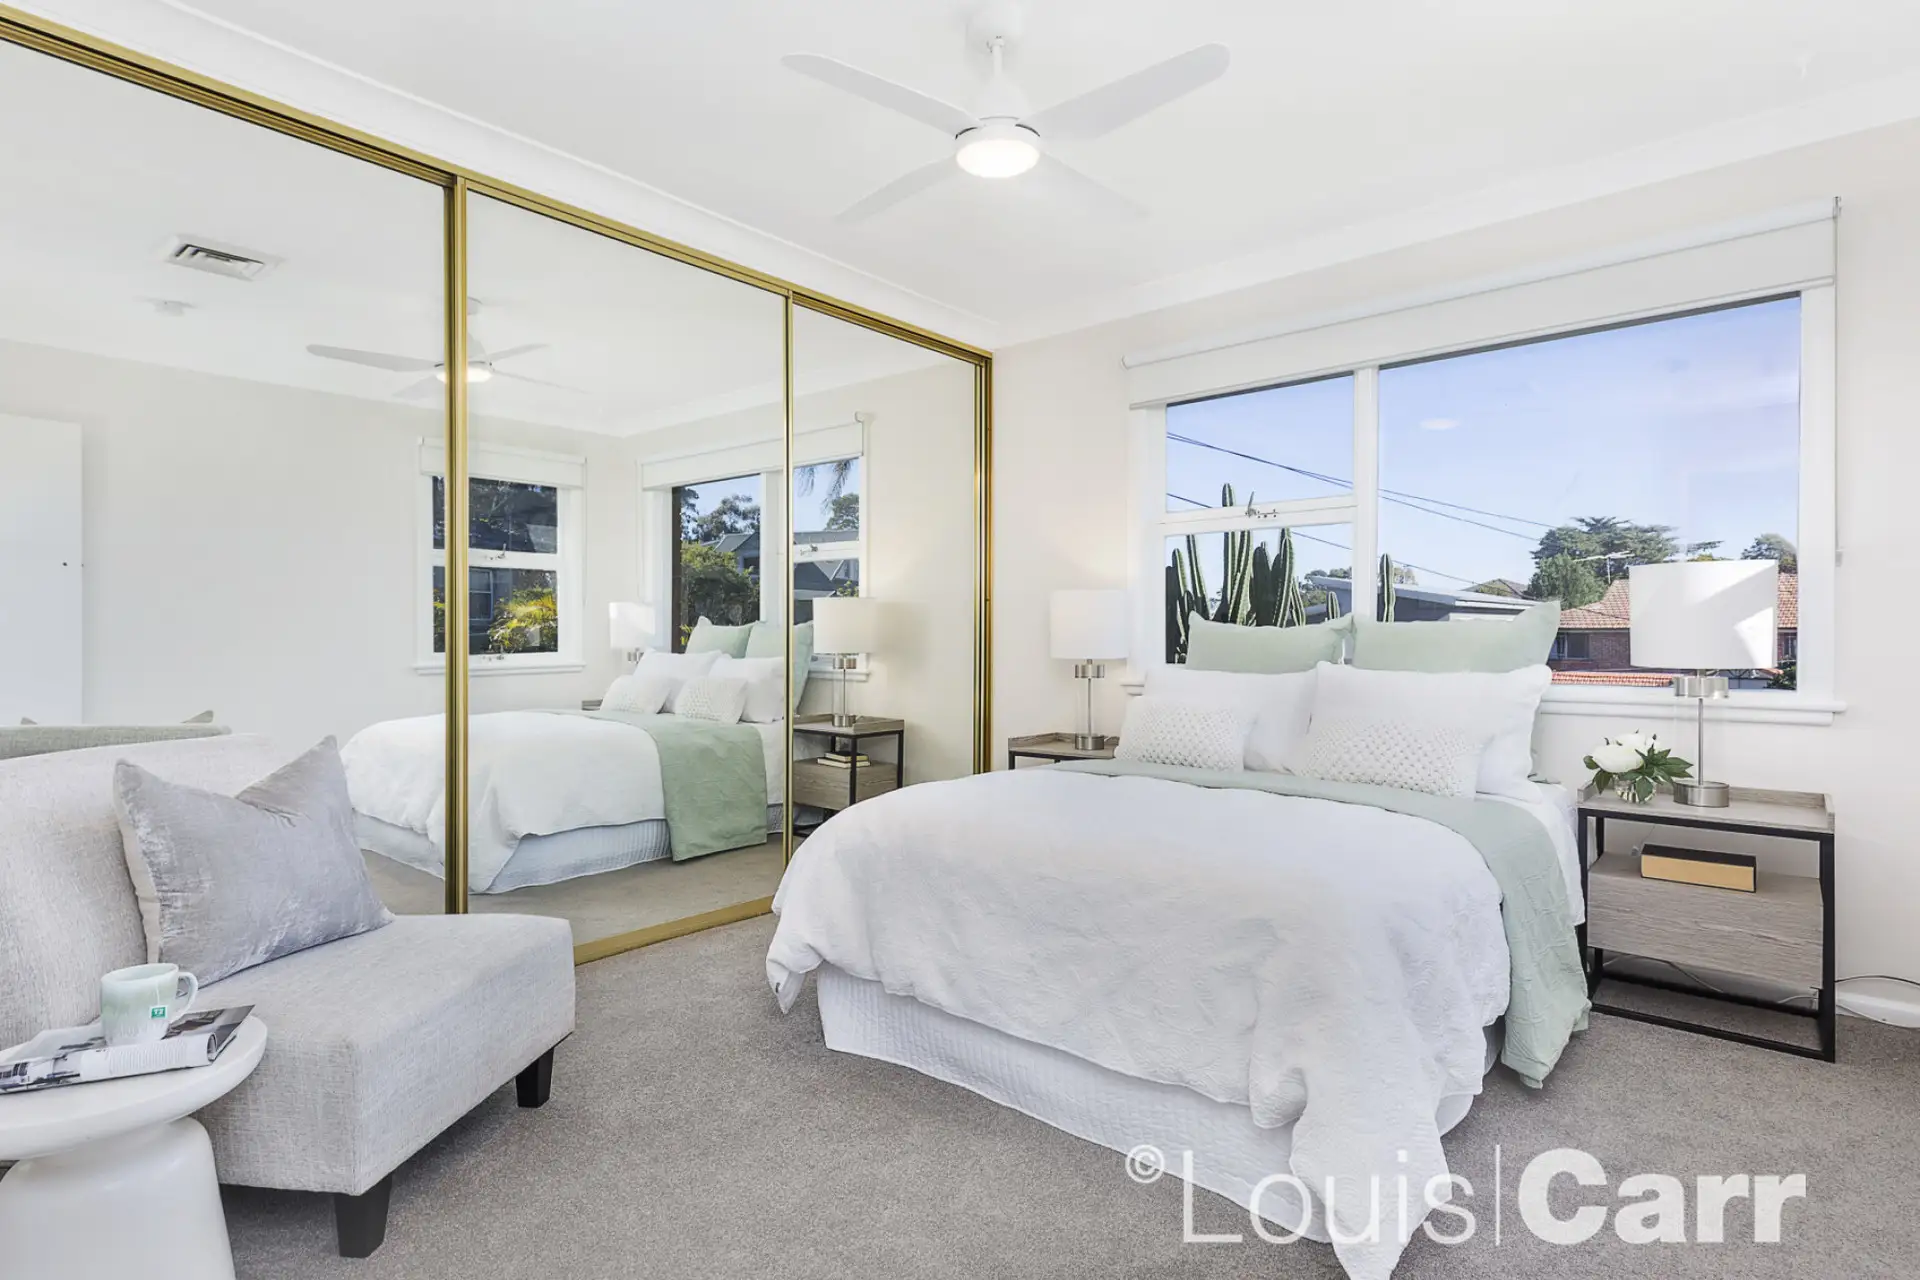 Photo #4: 4 Towns Street, Gladesville - Sold by Louis Carr Real Estate